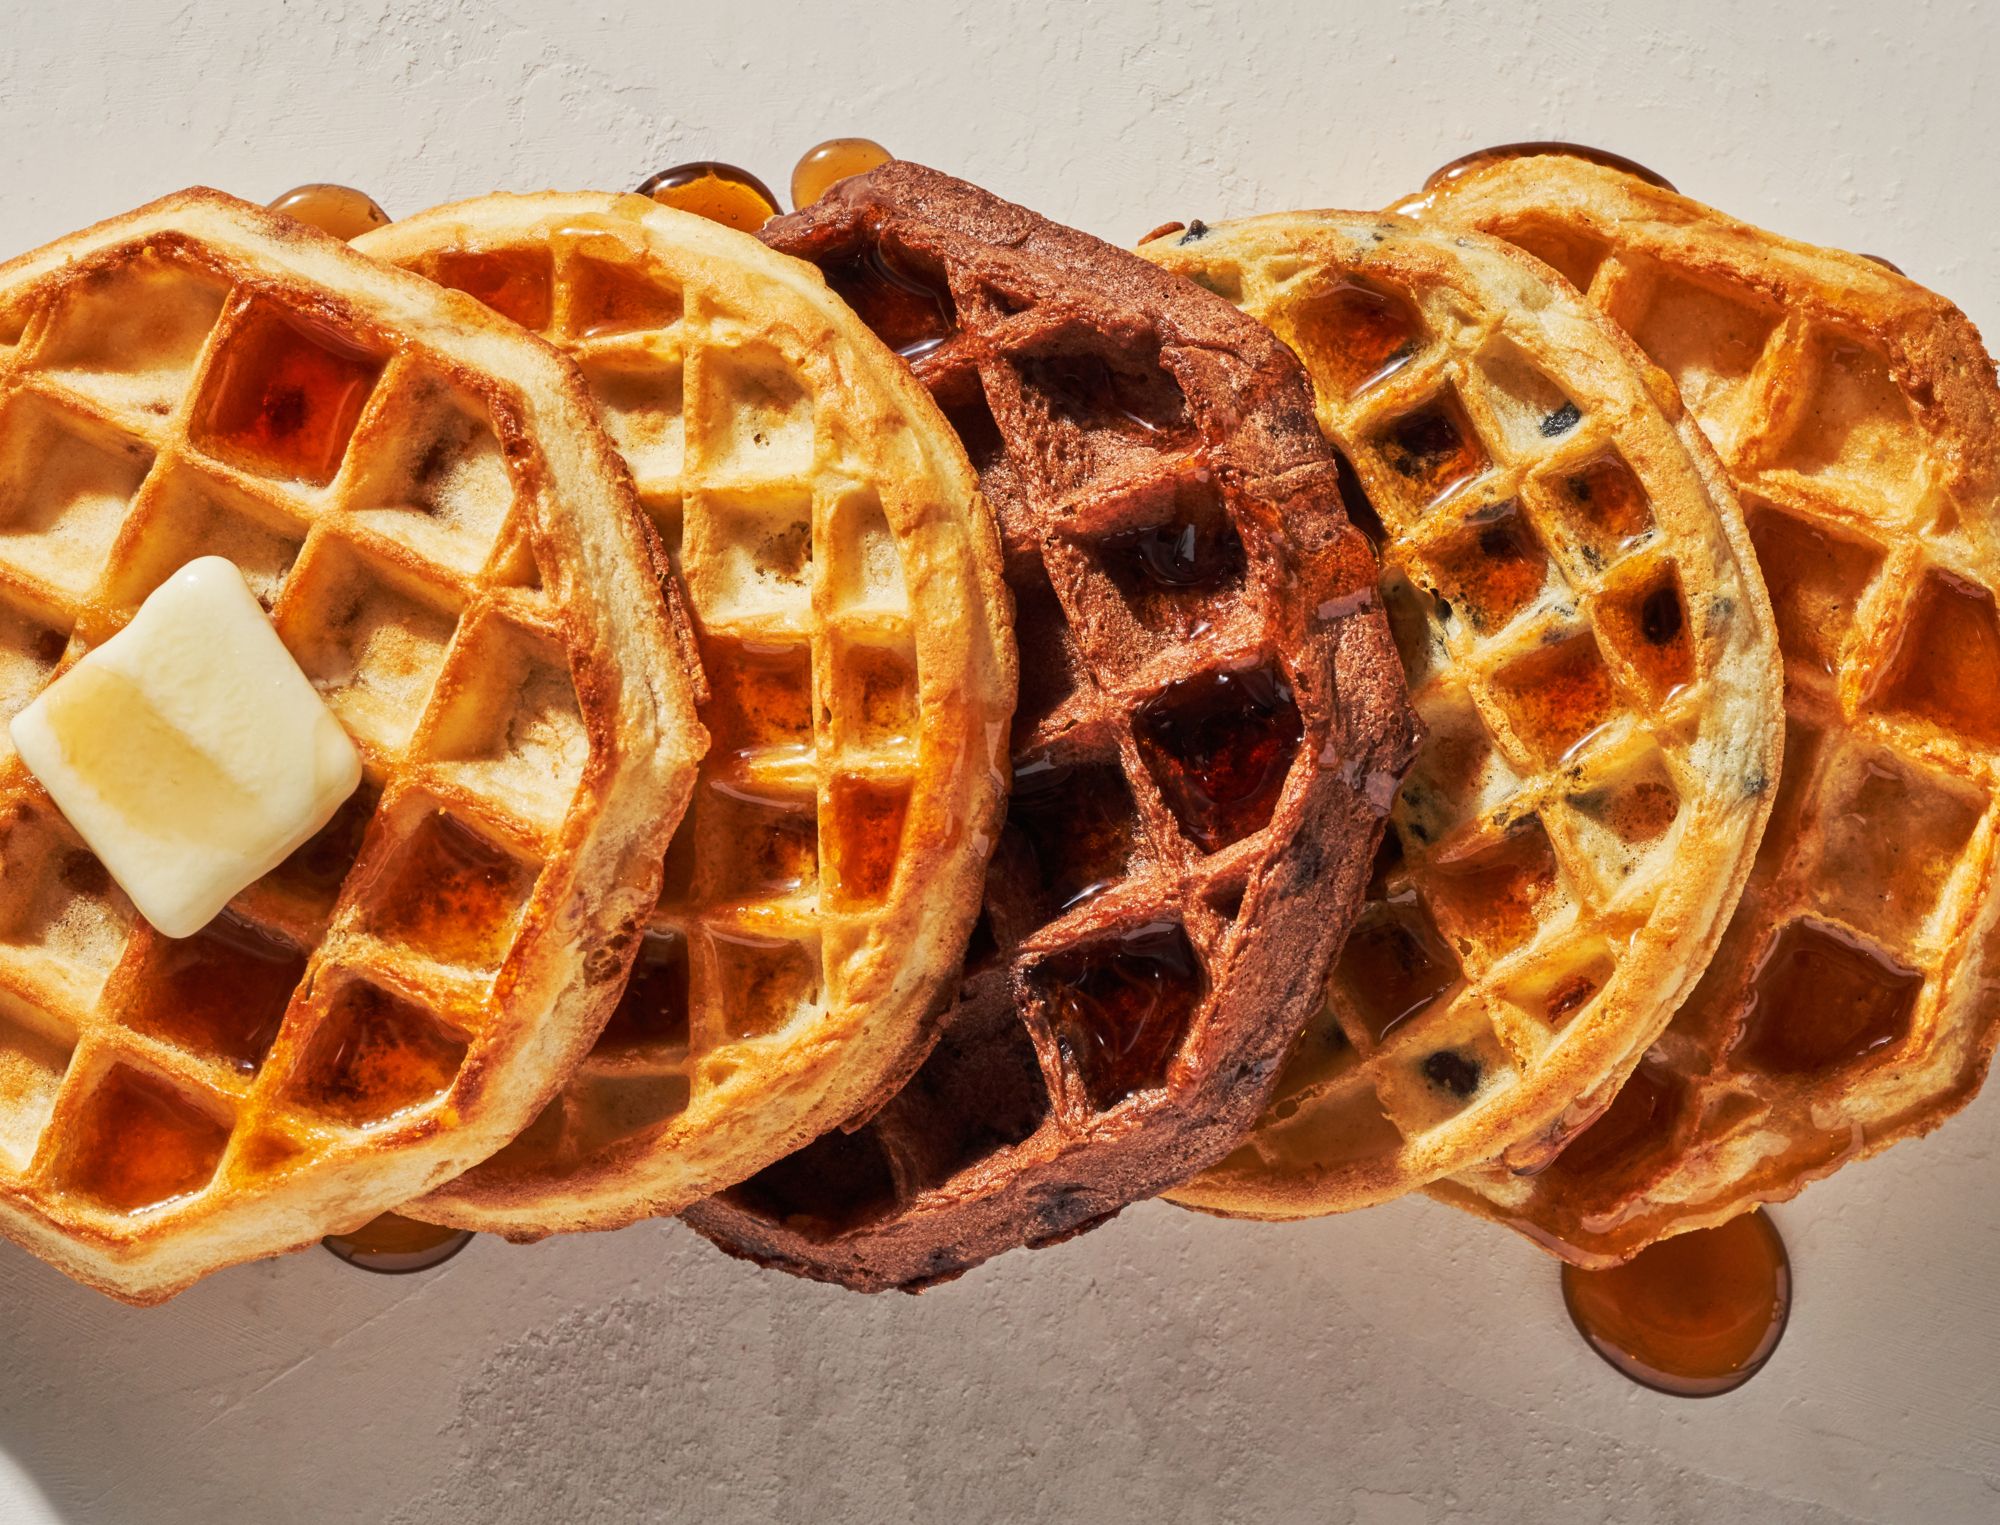 5 Best Eggo Waffle Flavors Based On Their Fluff To Crunch Ratio